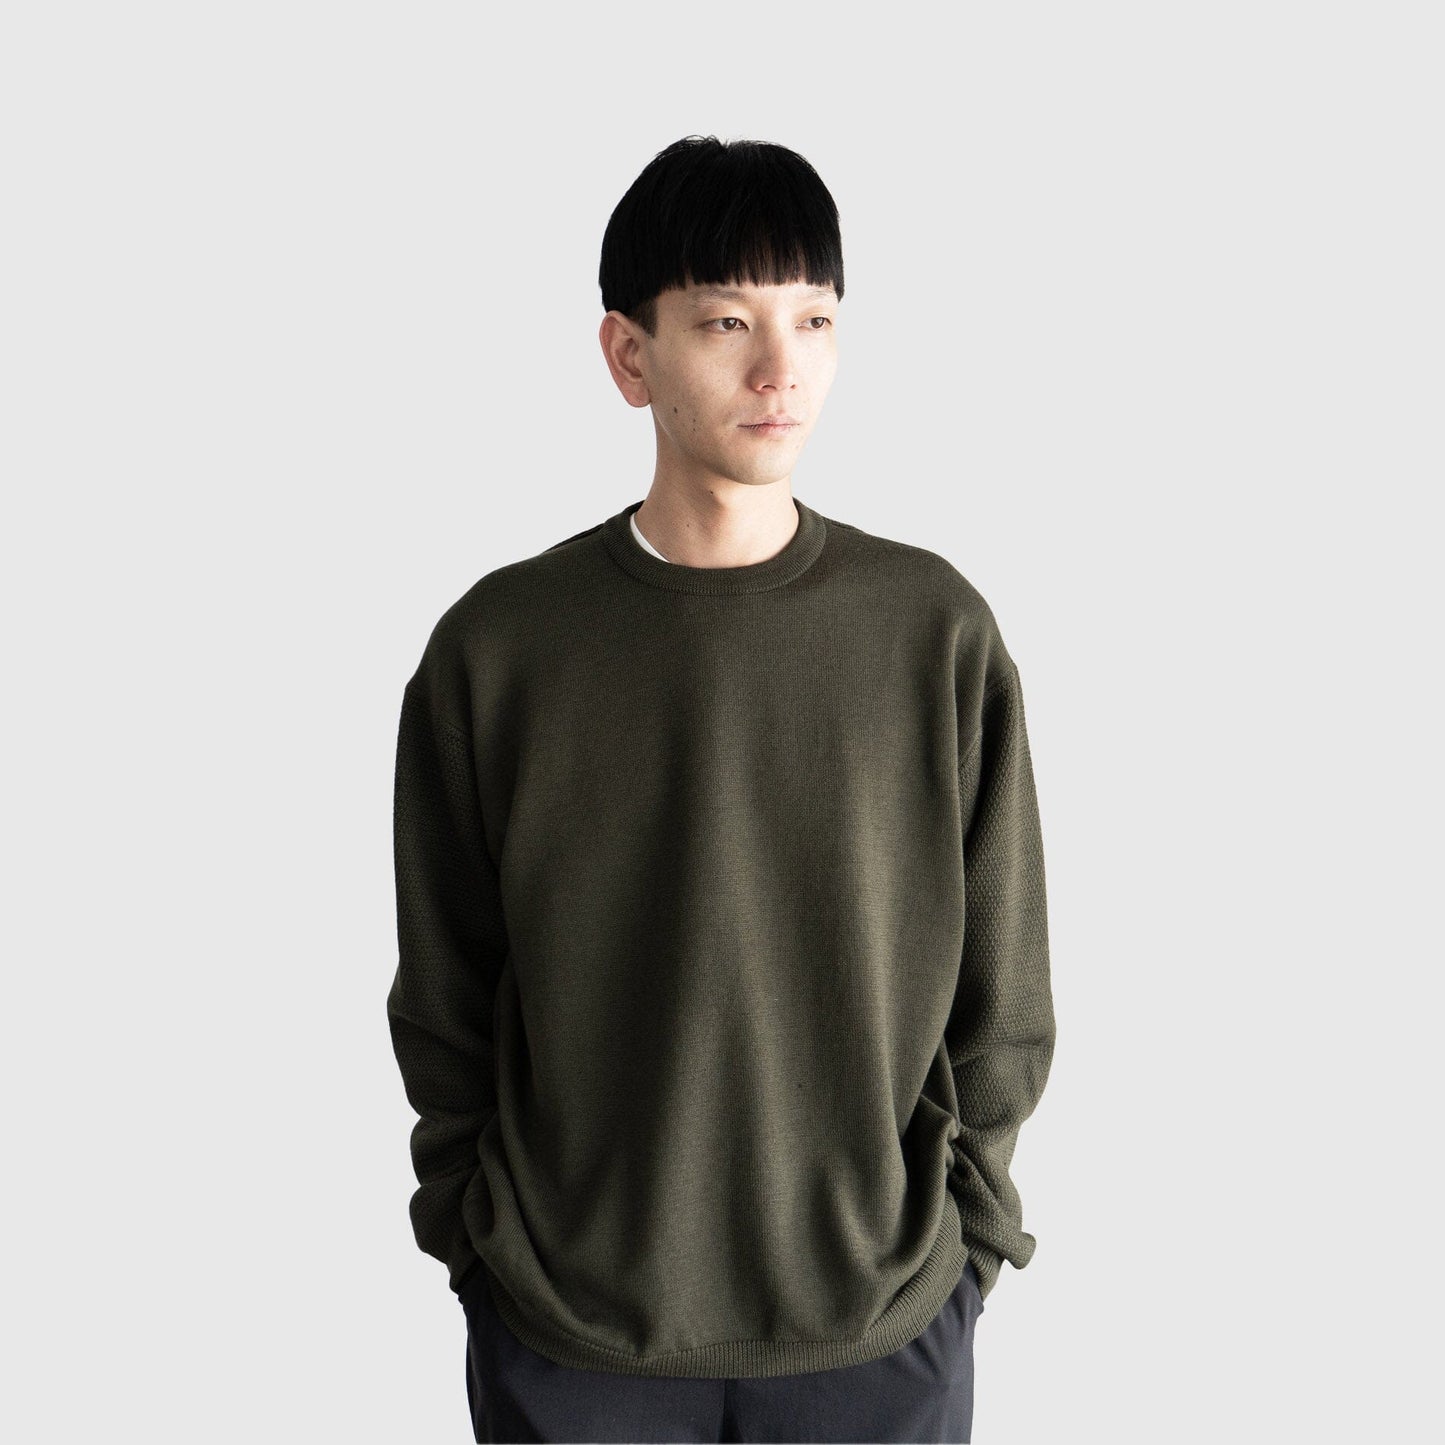 Still By Hand 10G Patterned Sweater - Olive Knitwear Still By Hand 